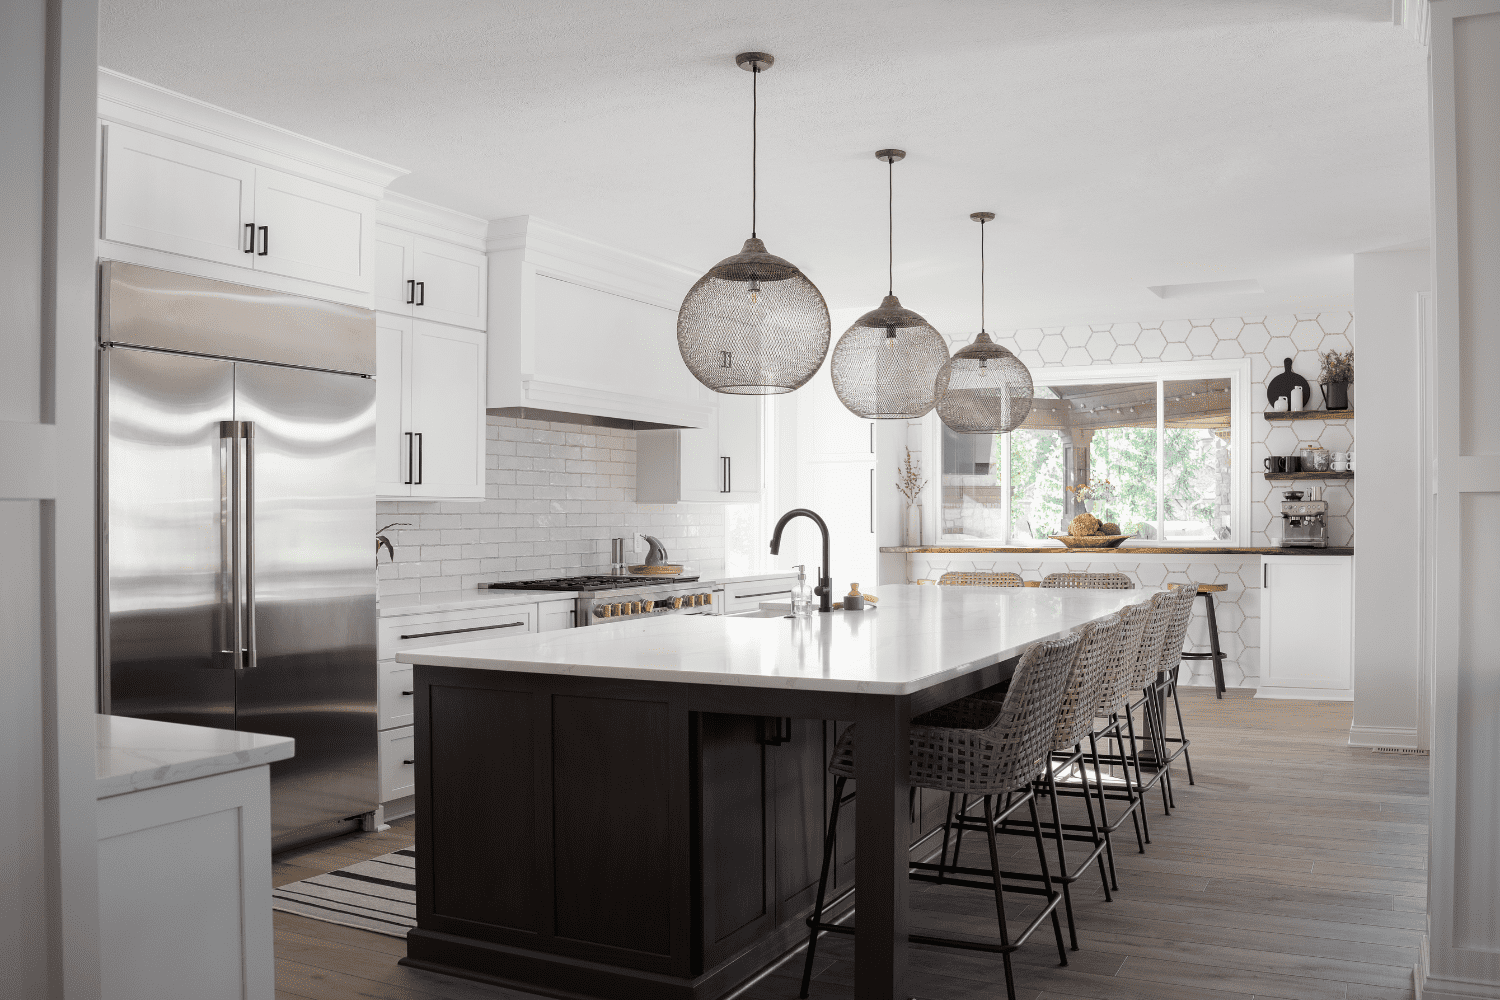 Nicholas Design Build | A kitchen with white cabinets and black counter tops.